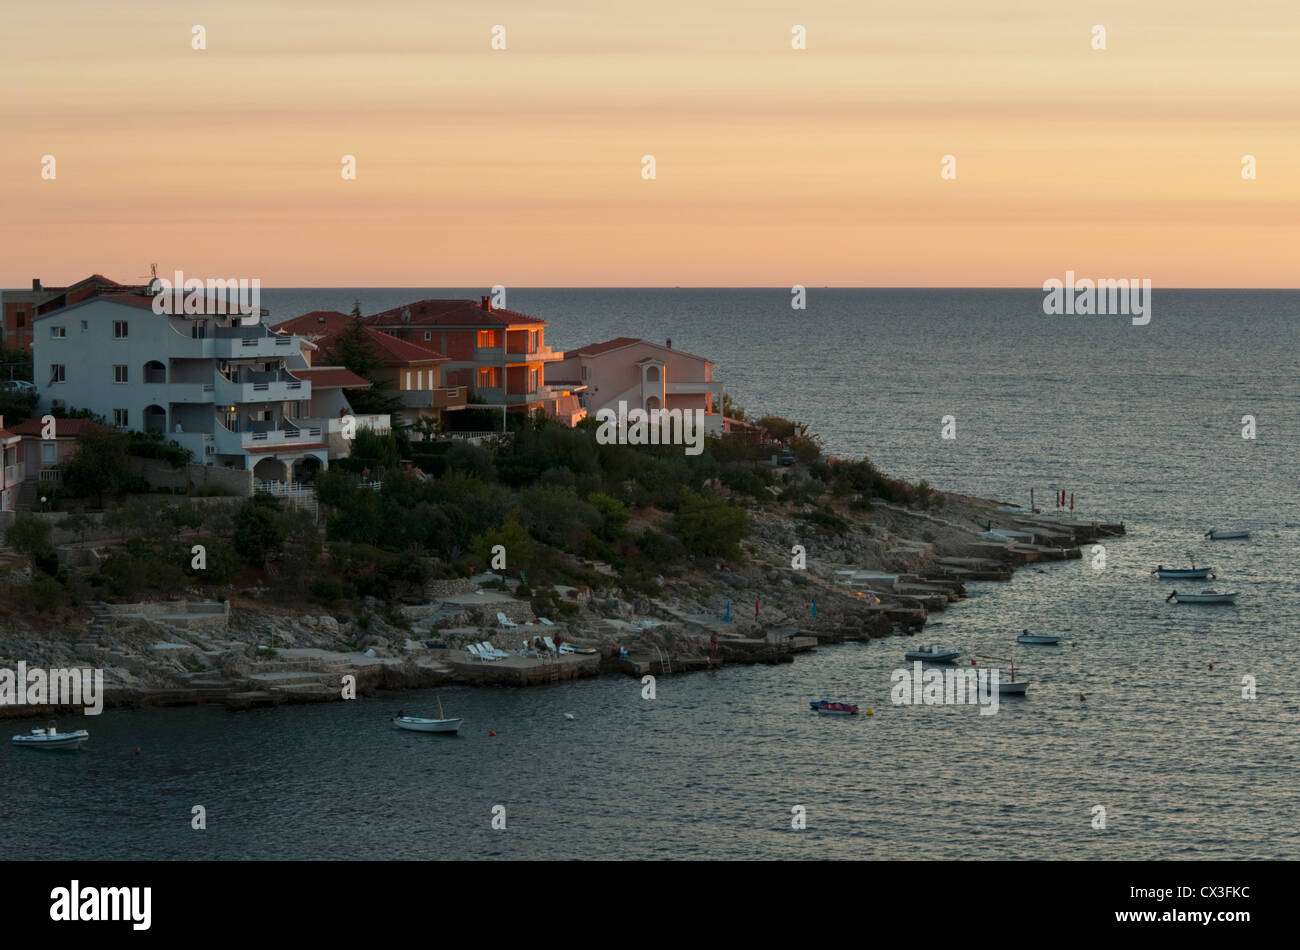 Croatia. Sunset over Adriatic with a view on peninsula with houses Stock Photo